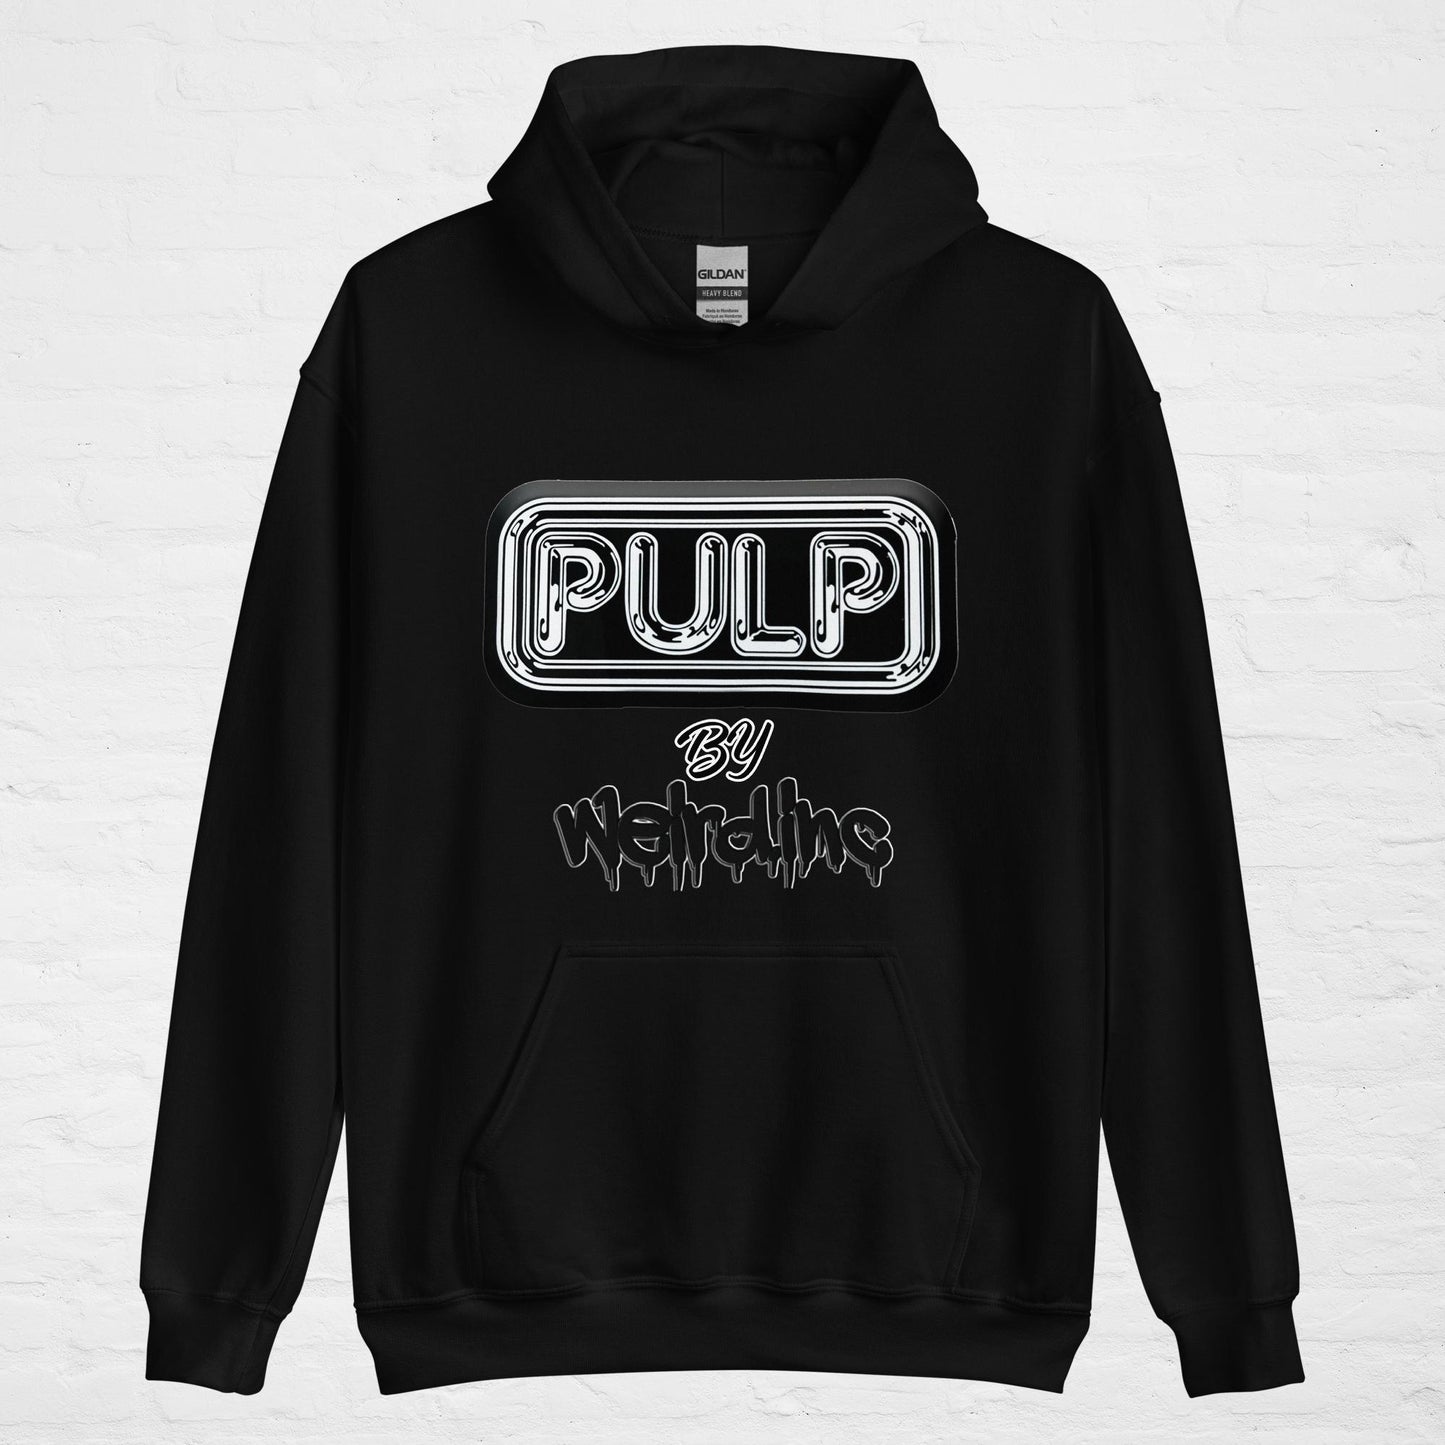 Pulp by Weird.inc Casual Unisex Hoodie